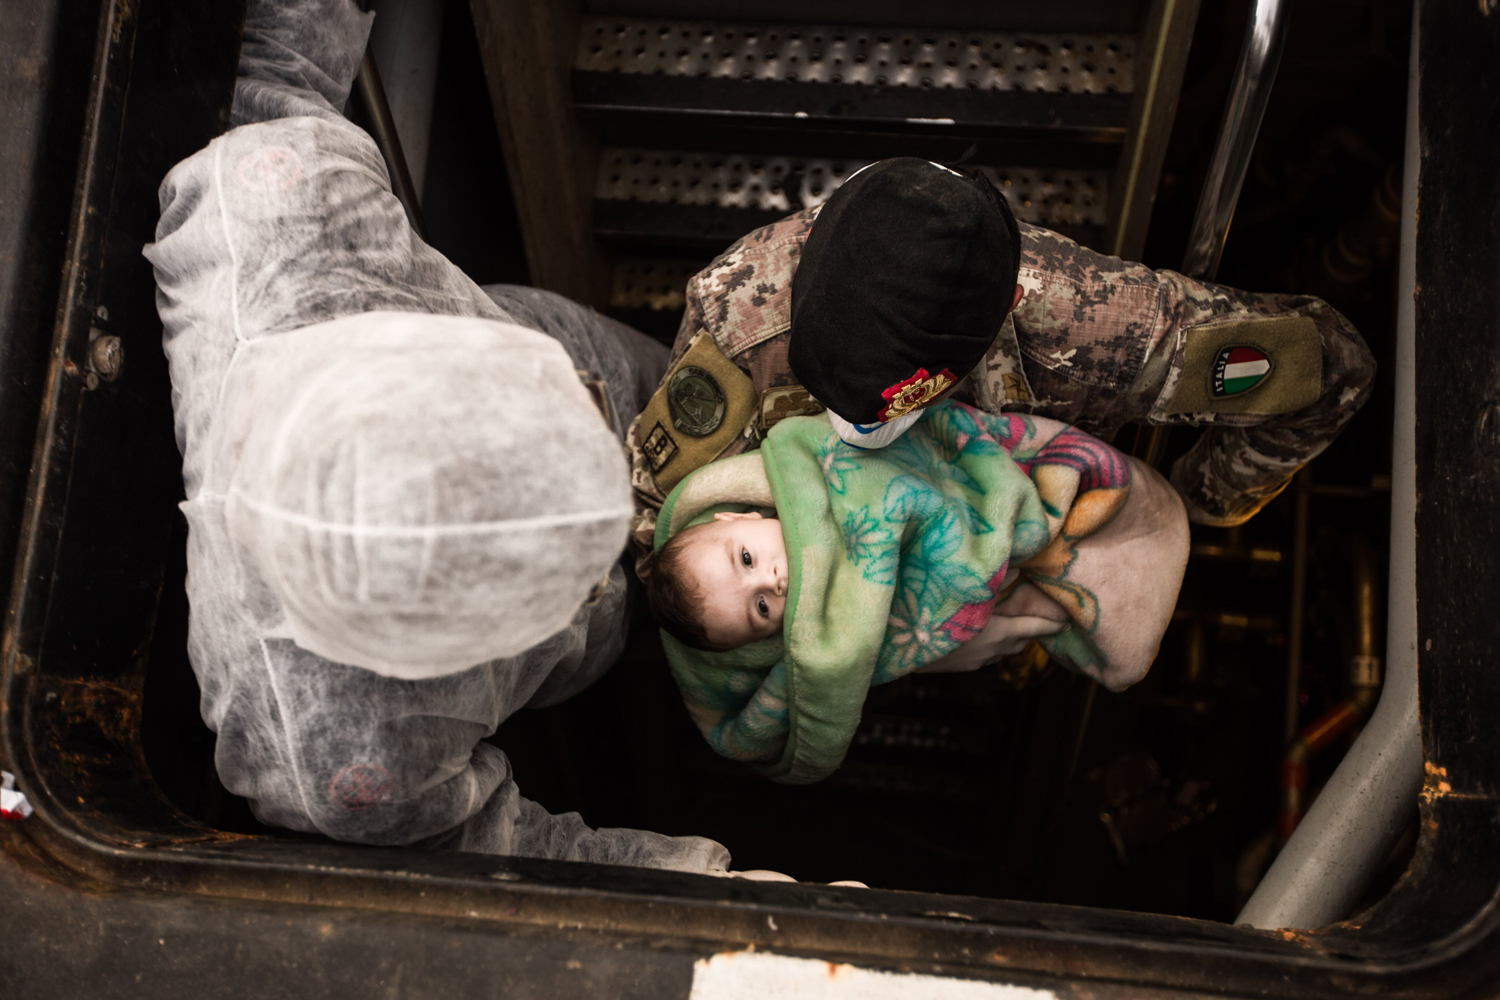 Italian soldier carries a Syrian child on a ship after the Italian navy rescued 443 Syrian asylum seekers off a fishing vessel, June 5.